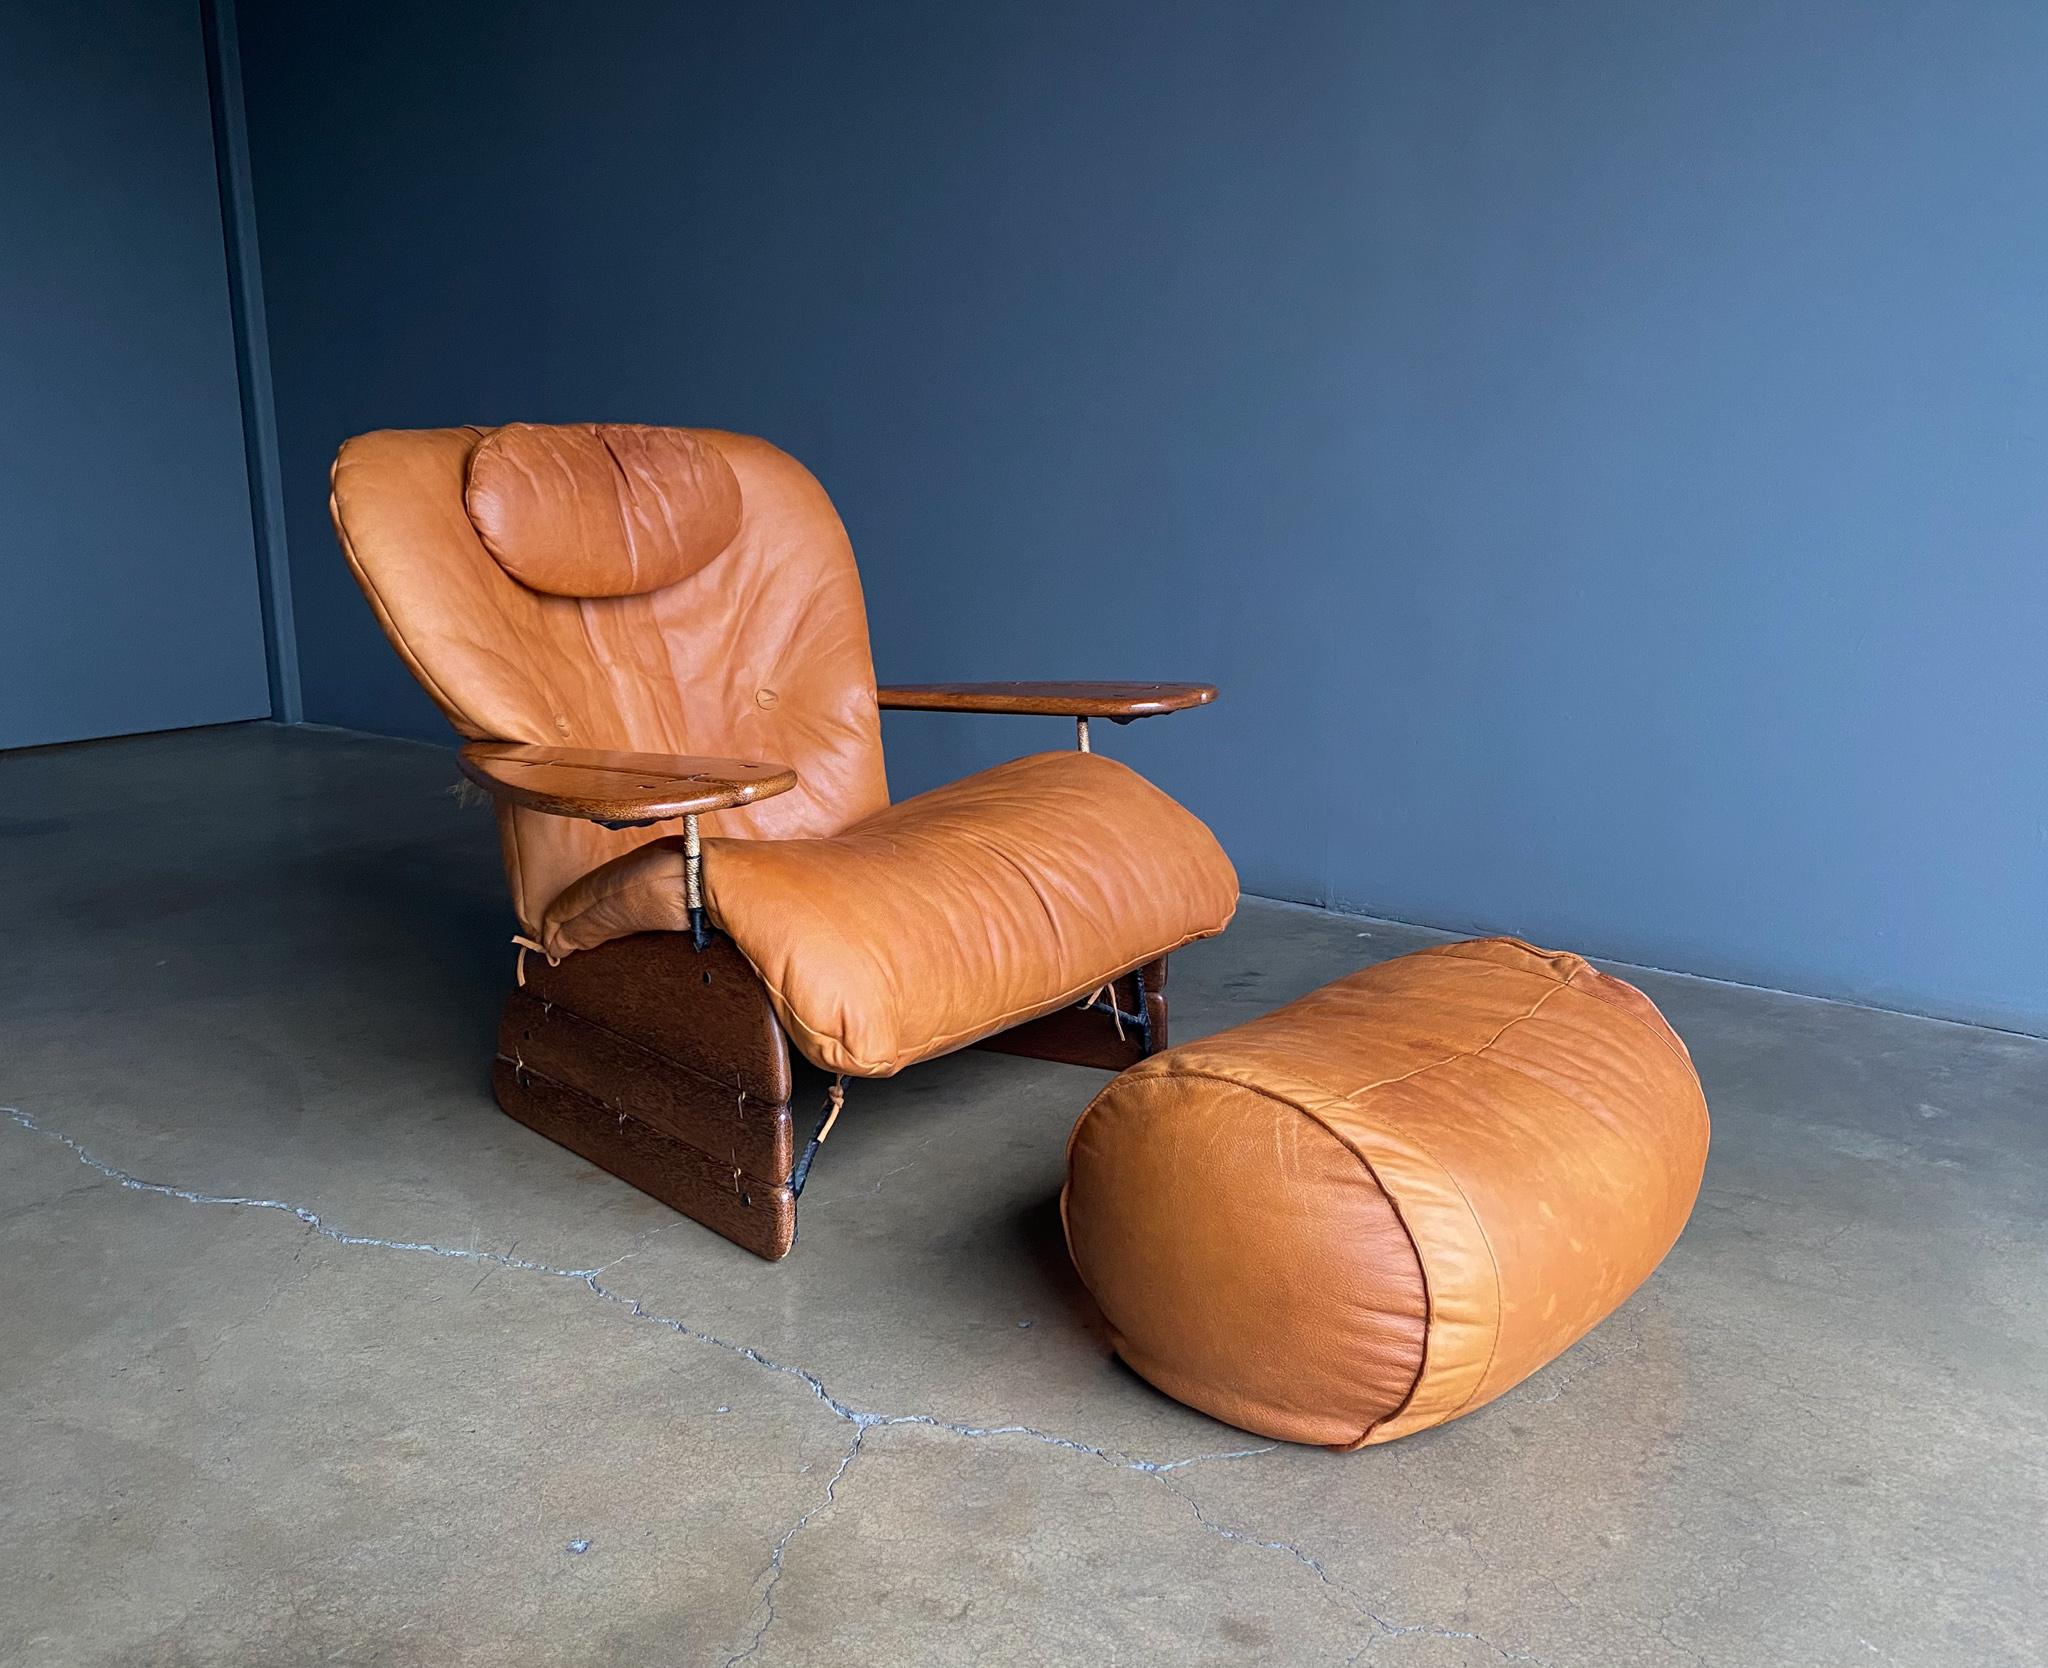 Pacific green Cognac leather & palmwood Havana lounge chair & ottoman, 1990's. Nice original patina. Perfectly broken in. A really comfortable chair. 

The ottoman measures: 30